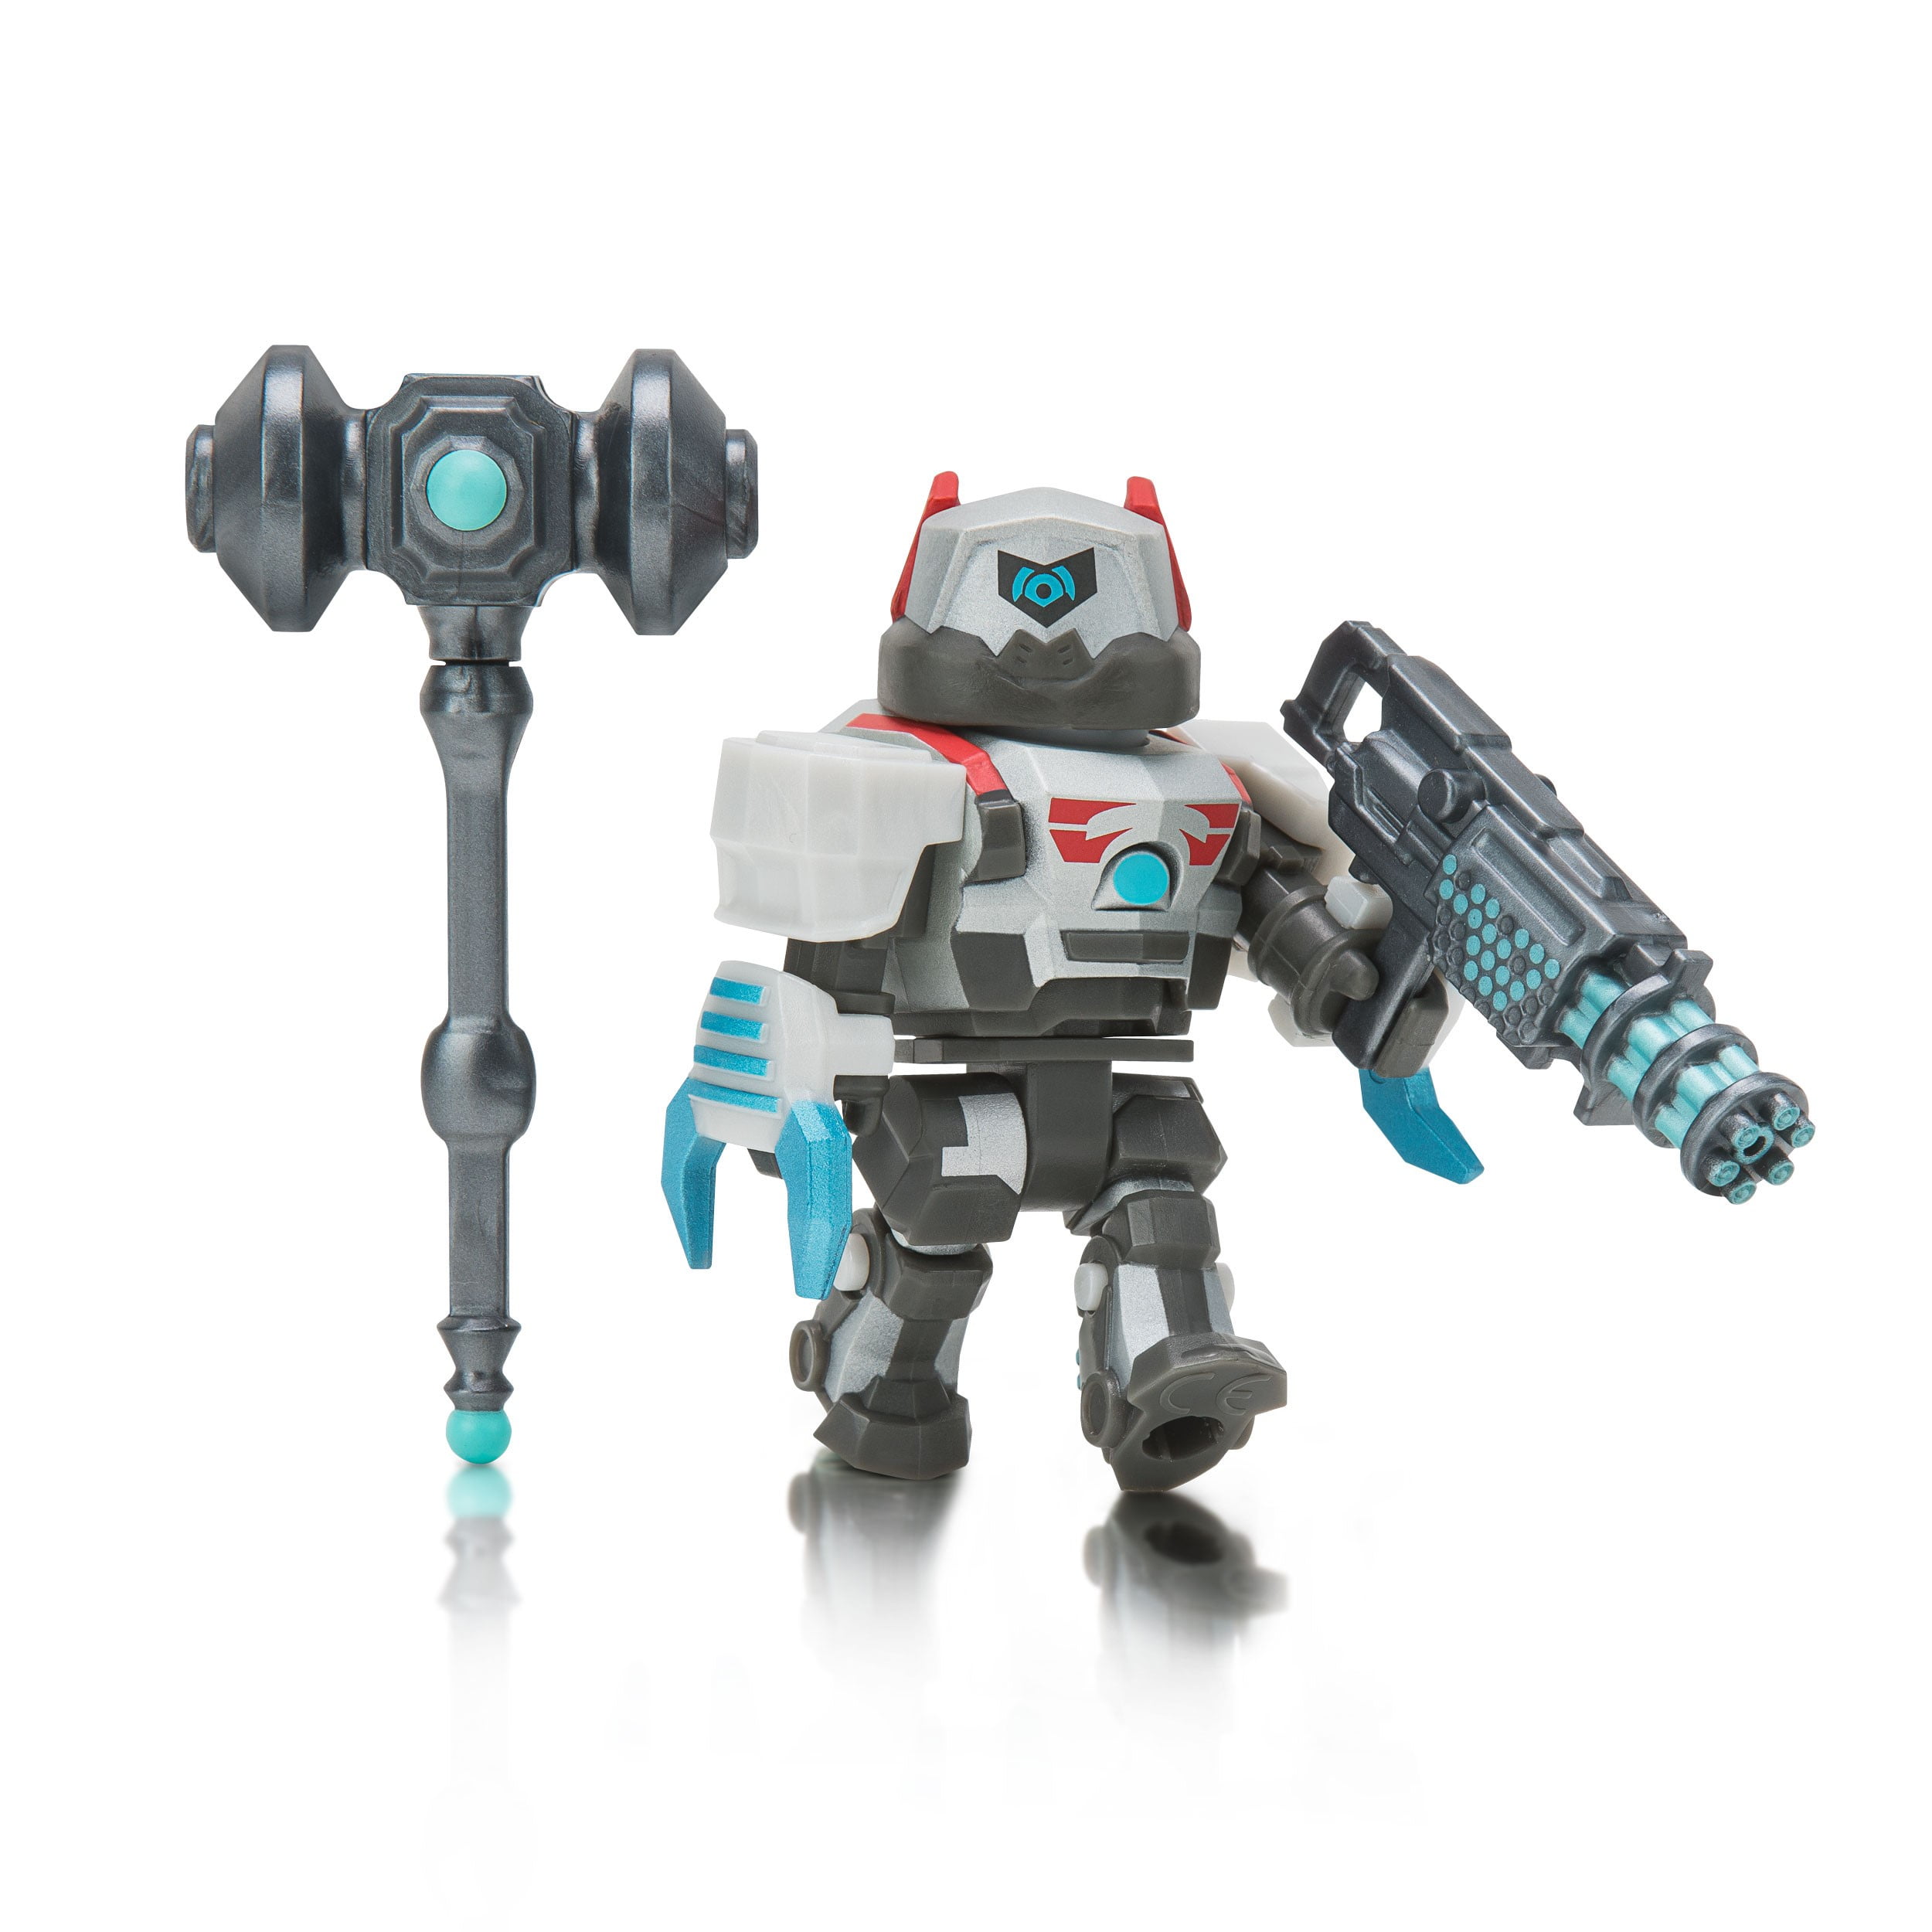 Roblox Action Collection Dueldroid 5000 Figure Pack Includes Exclusive Virtual Item Walmart Com Walmart Com - juguetes de roblox en walmart